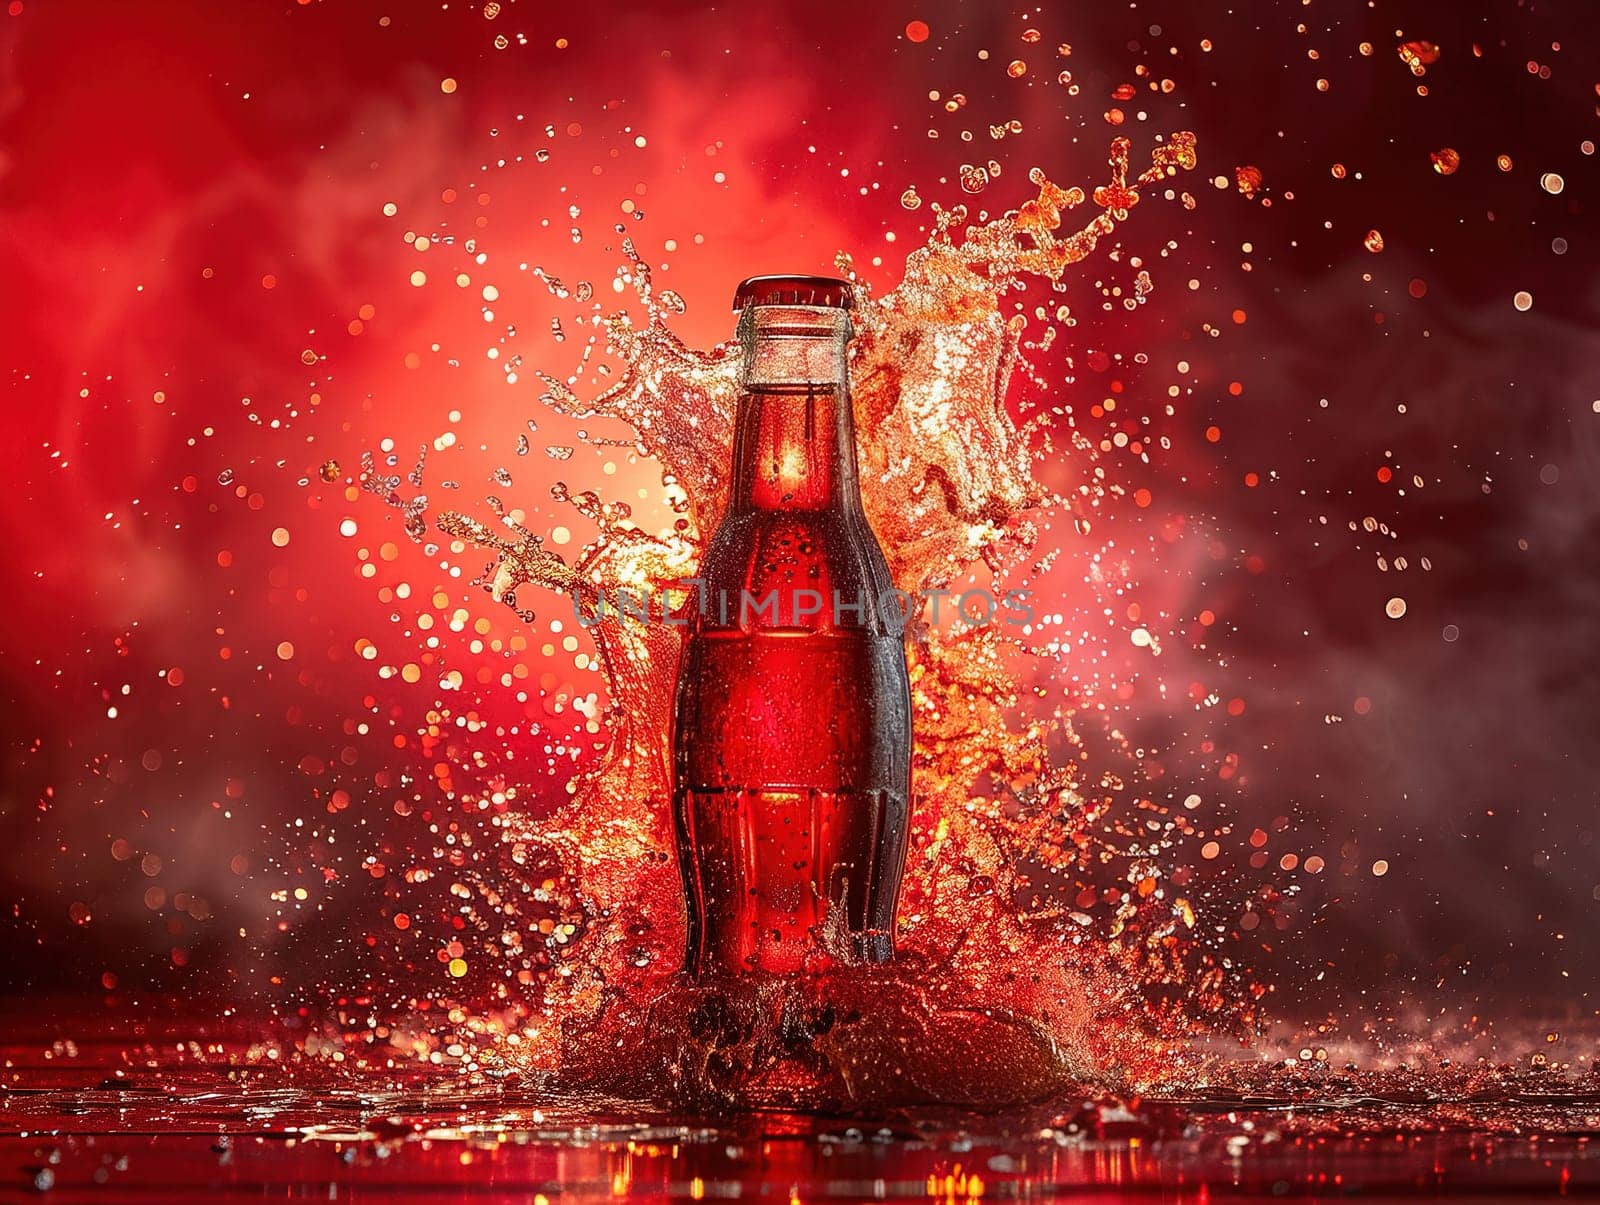 Delicious Cola photography, explosion flavors, studio lighting, studio background well-lit vibrant colors, sharp-focus, high-quality, artistic, unique. Cola in original glass with straw and ice cubes